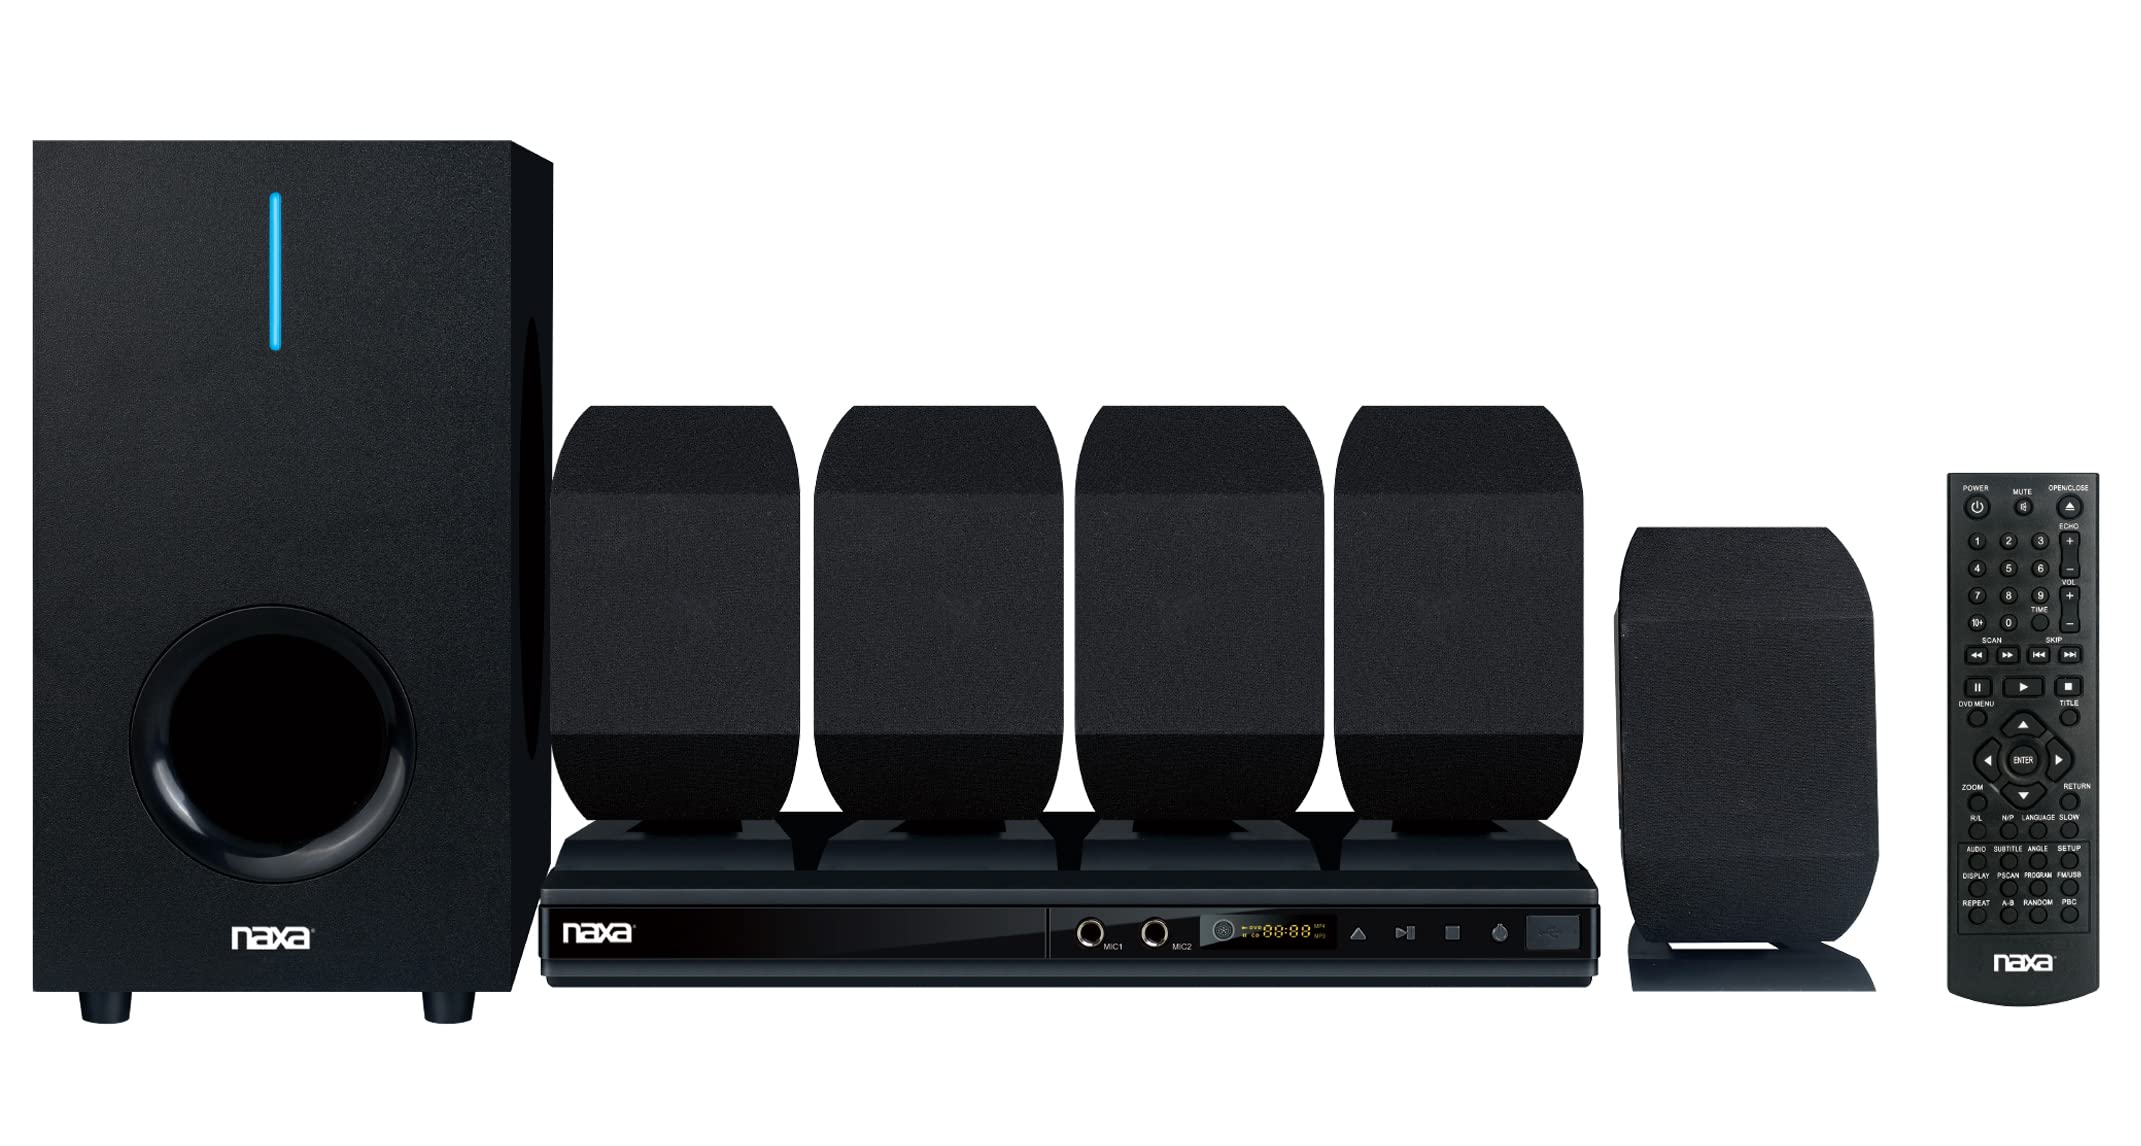 Naxa ND-864 5.1 Channel High-Powered Home Theater DVD and Karaoke Speaker Surround Sound System, Black